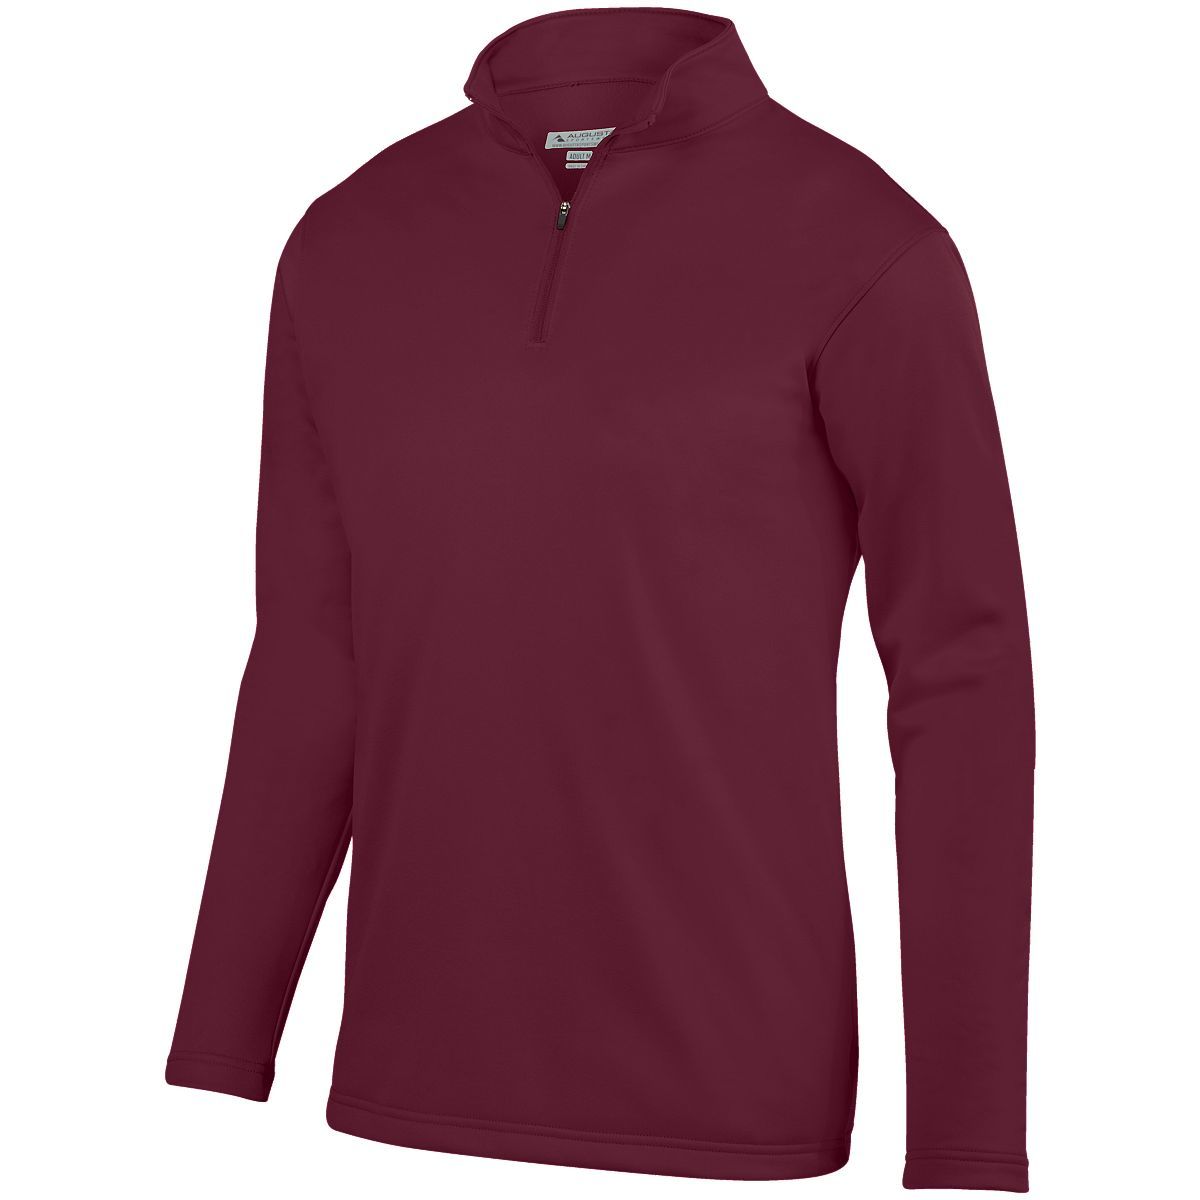 Augusta Sportswear Youth Wicking Fleece Pullover in Maroon  -Part of the Youth, Youth-Pullover, Augusta-Products, Outerwear product lines at KanaleyCreations.com